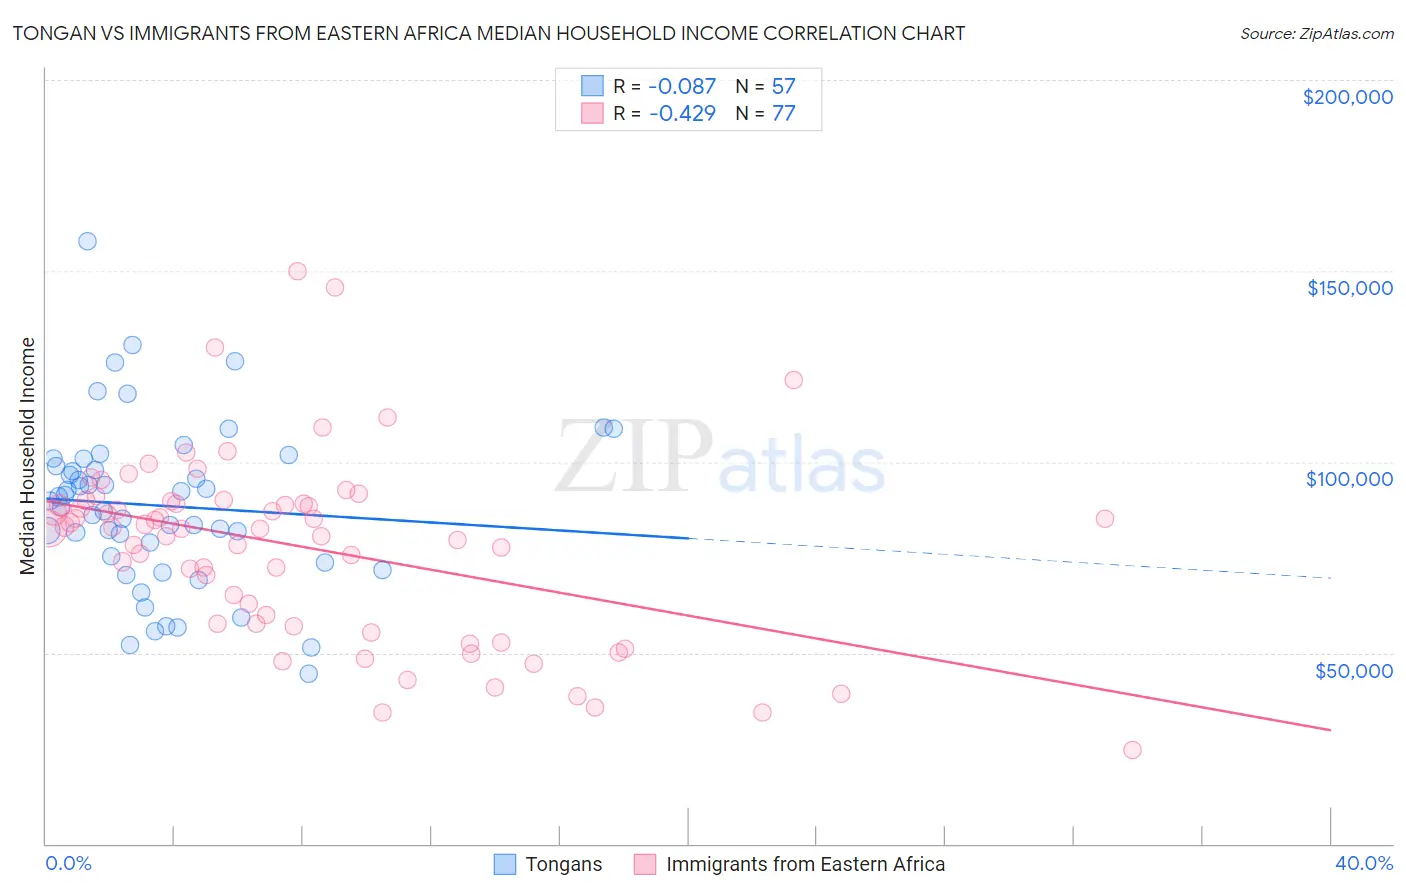 Tongan vs Immigrants from Eastern Africa Median Household Income